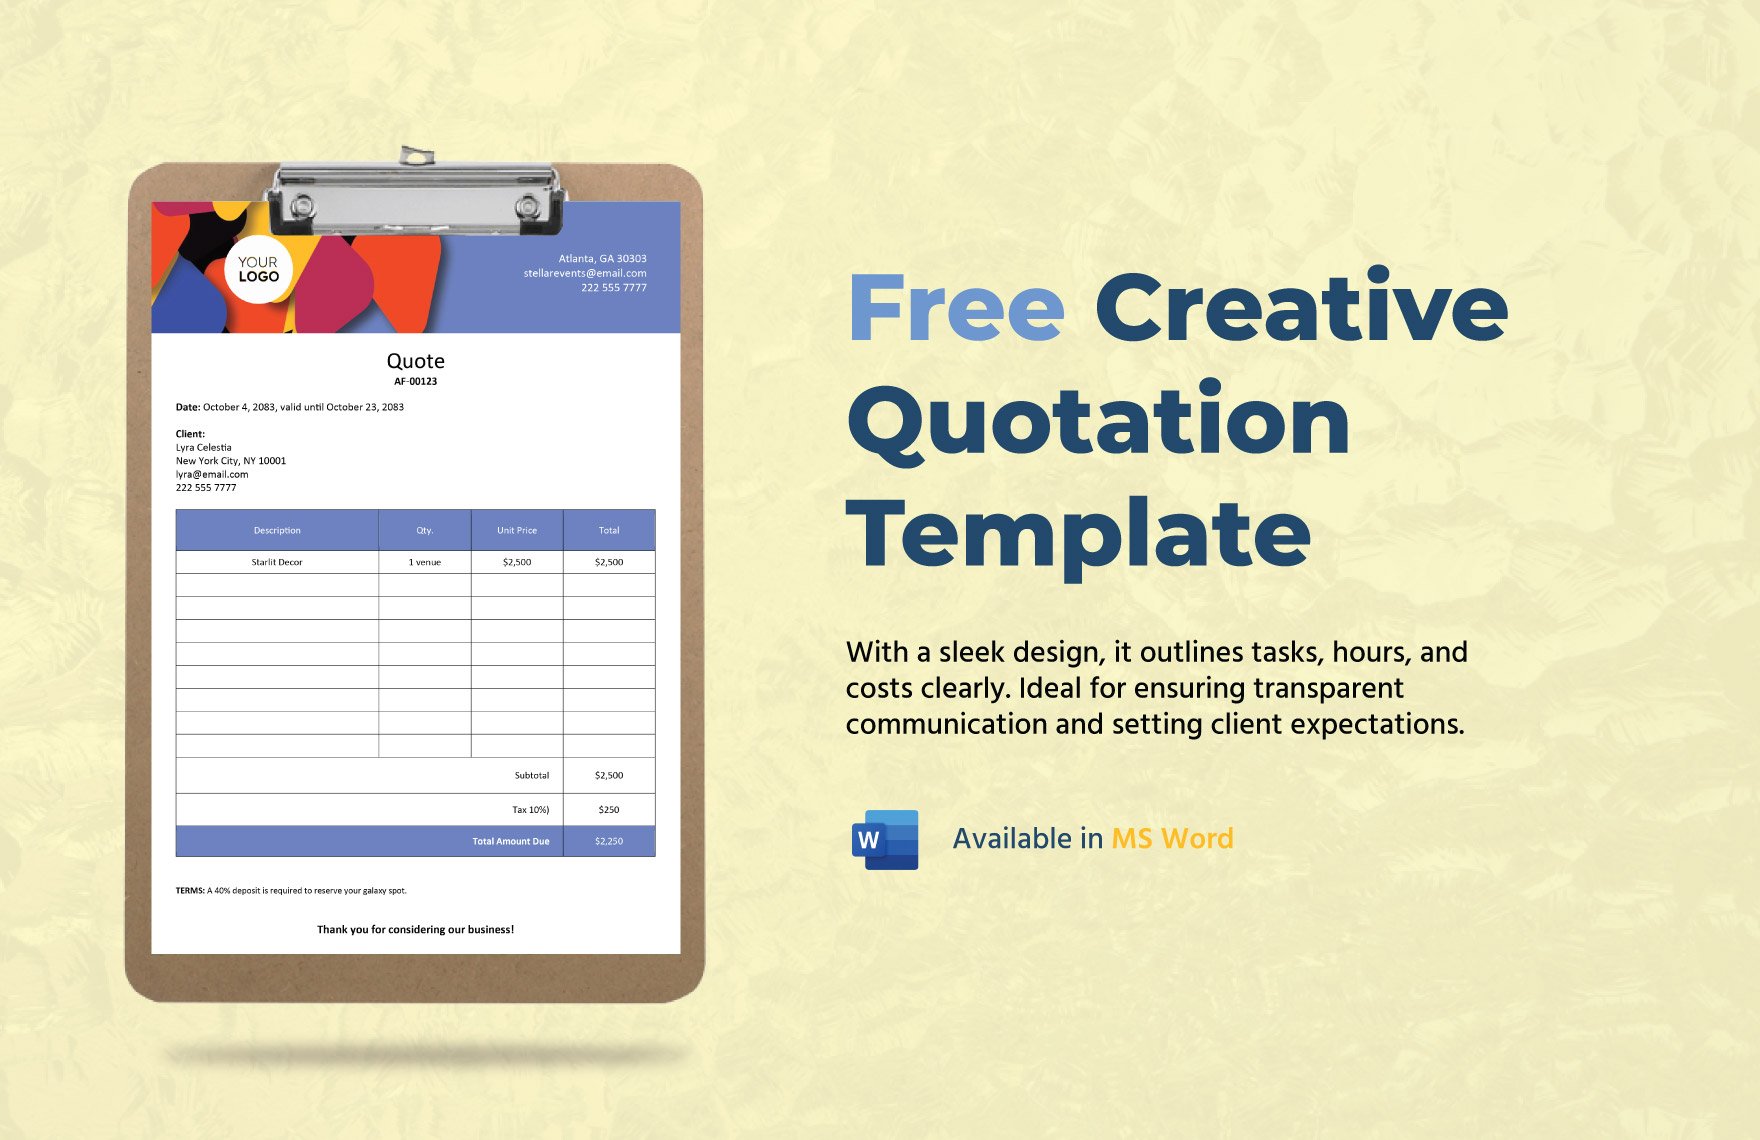 Free Creative Quotation Template